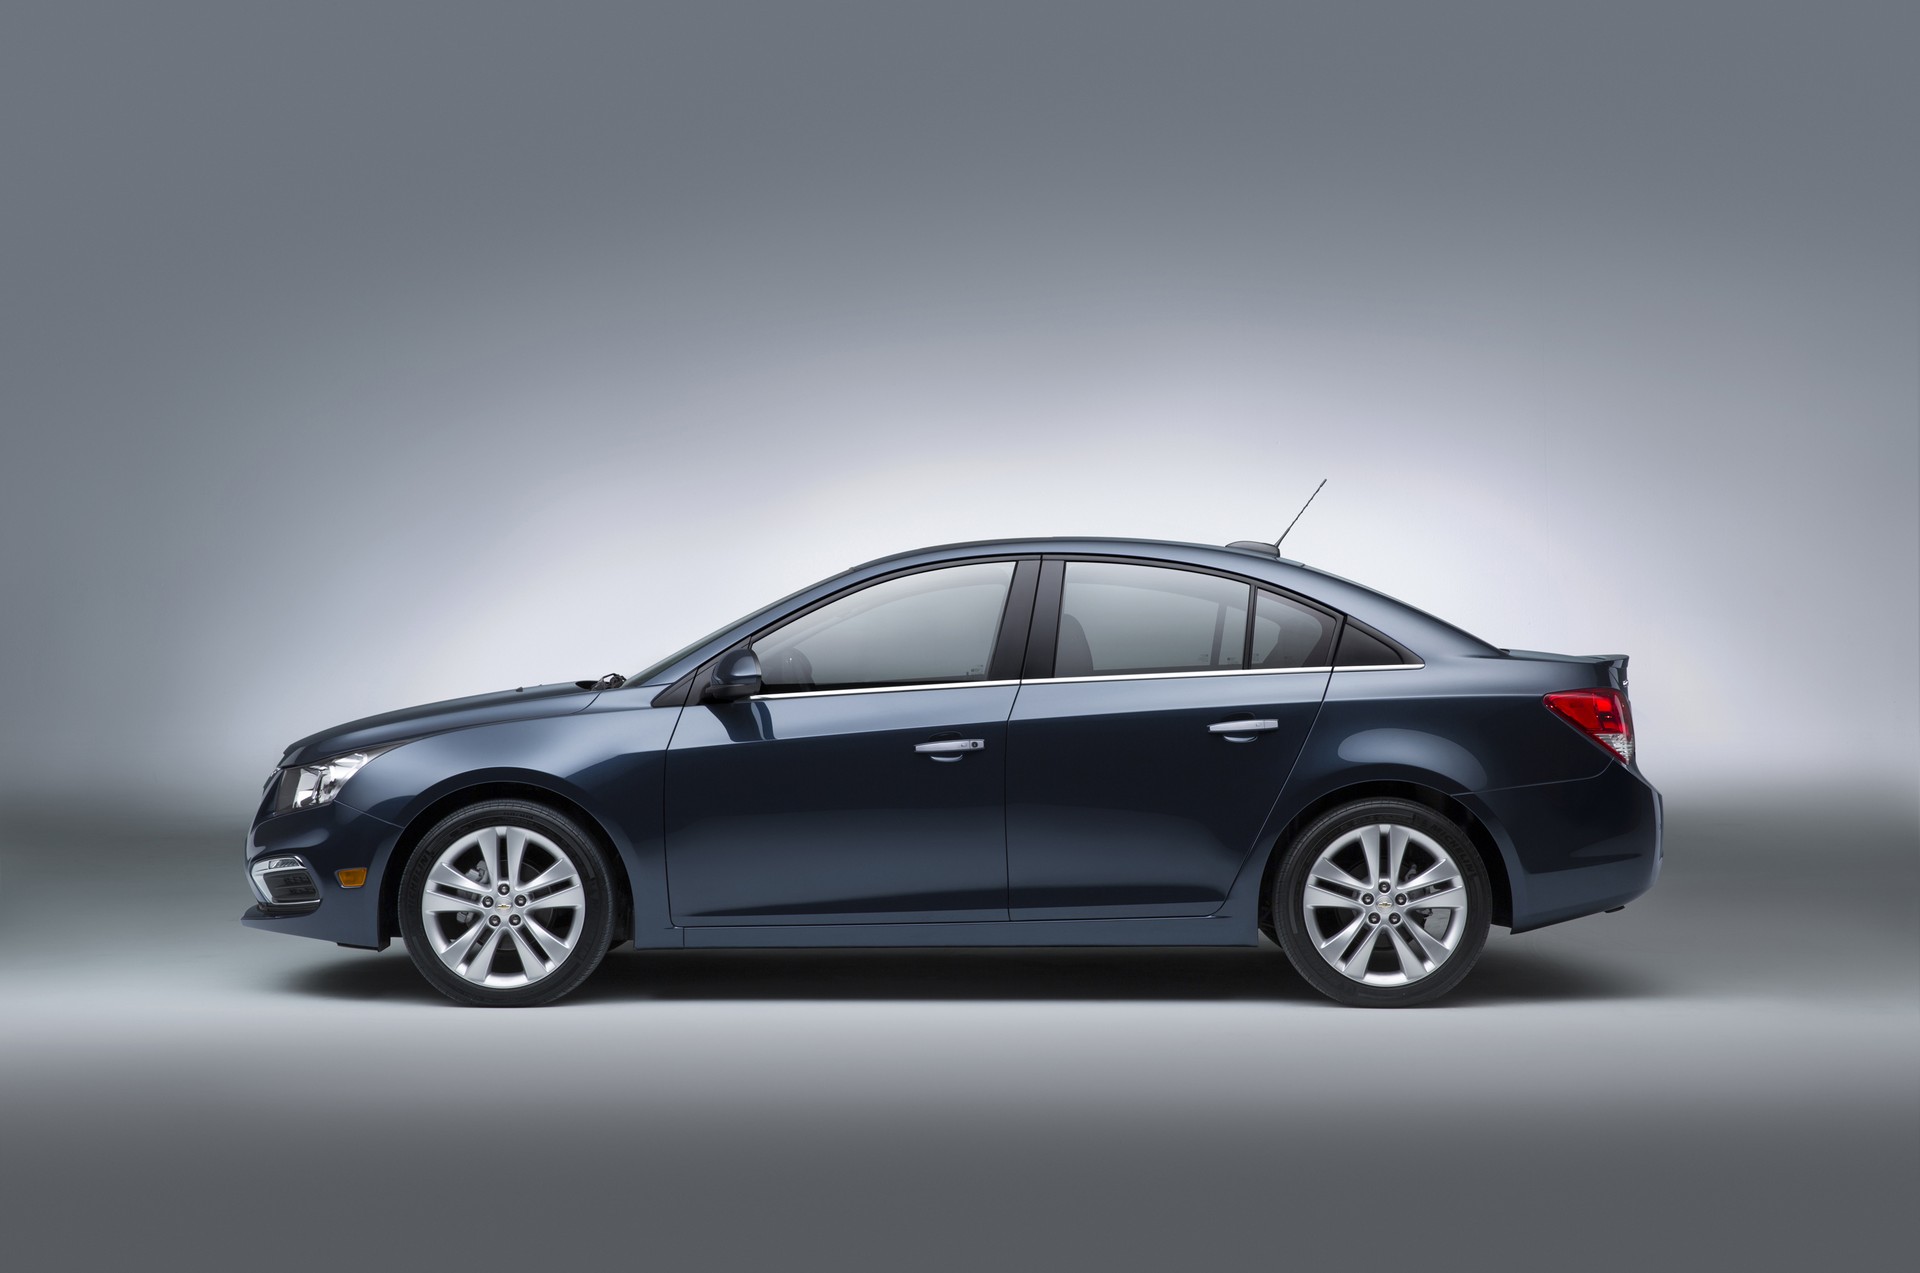 2015 Chevrolet Cruze (Chevy) Review, Ratings, Specs, Prices, and Photos -  The Car Connection